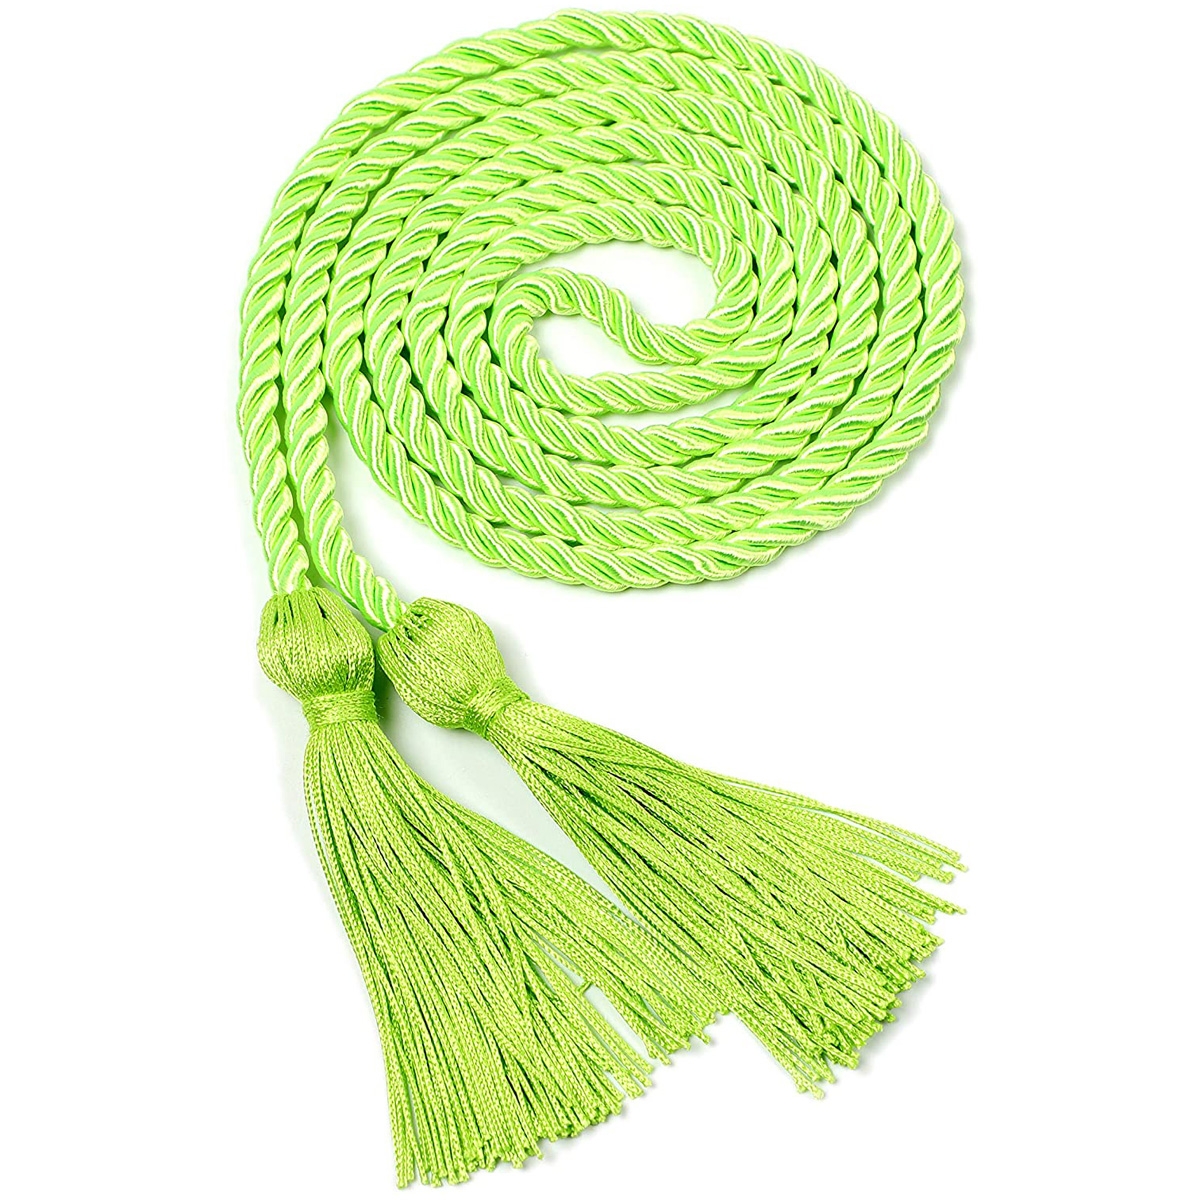 Cords Tassels Cords Polyester Yarn Honor Cord for Graduation Students 63 Inchs Long (Lemon Green)